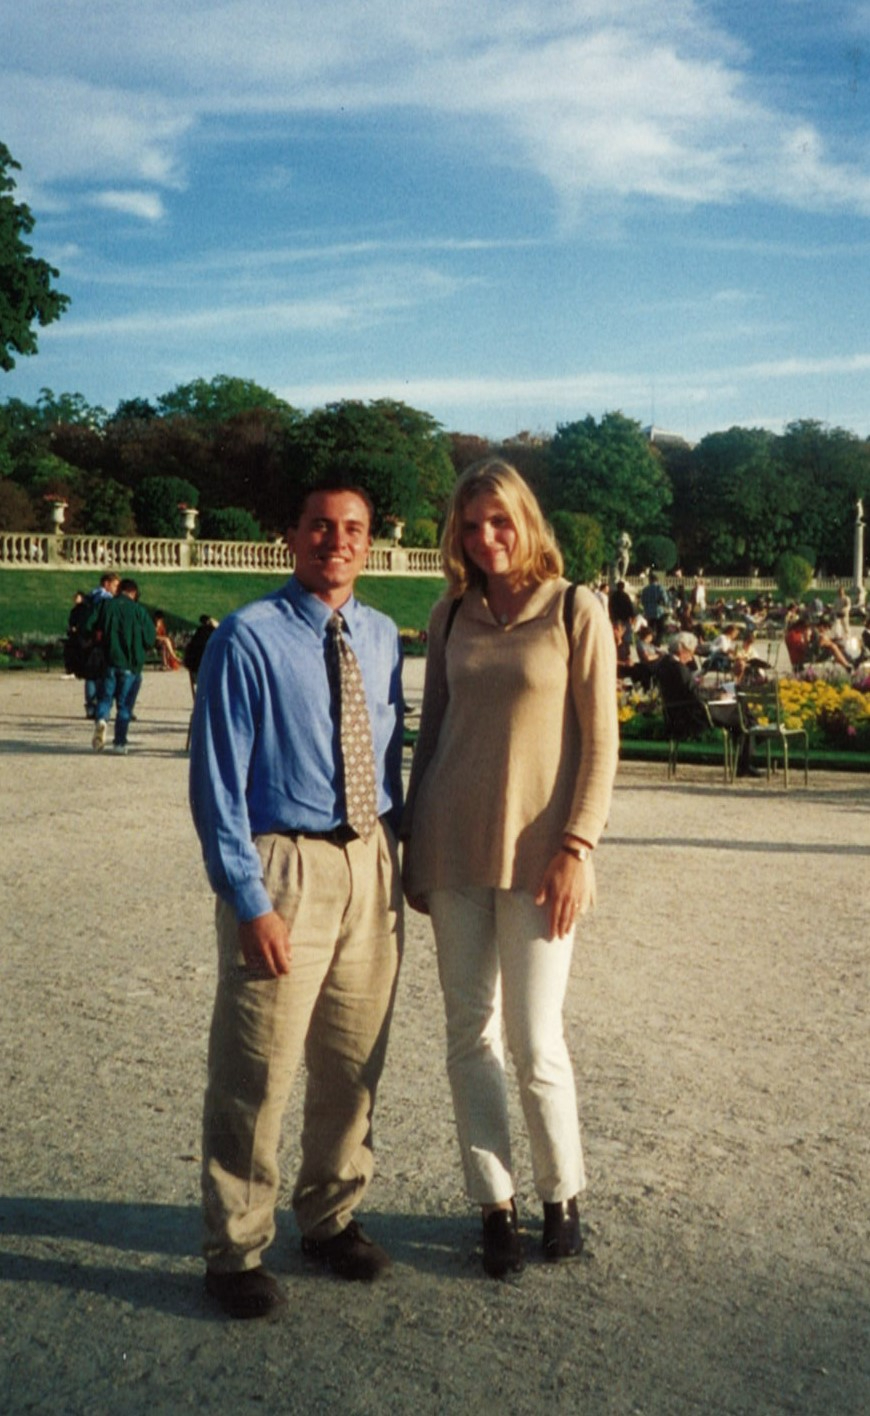 in a 1998 photo, a man and woman stand outside in a park